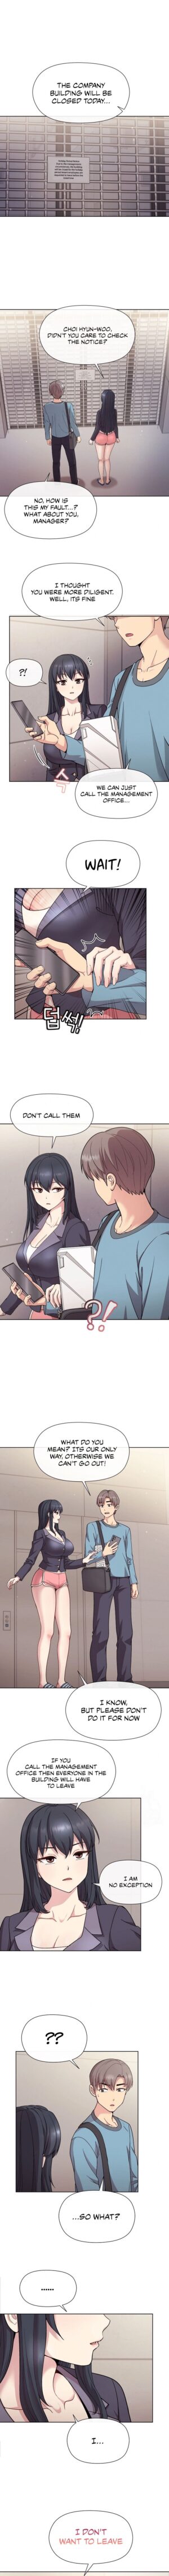 [Super Bunny / Lee Soo-yeon] Playing a Game With My Busty Manager (1-8) [English] [Omega Scans] [Ongoing]